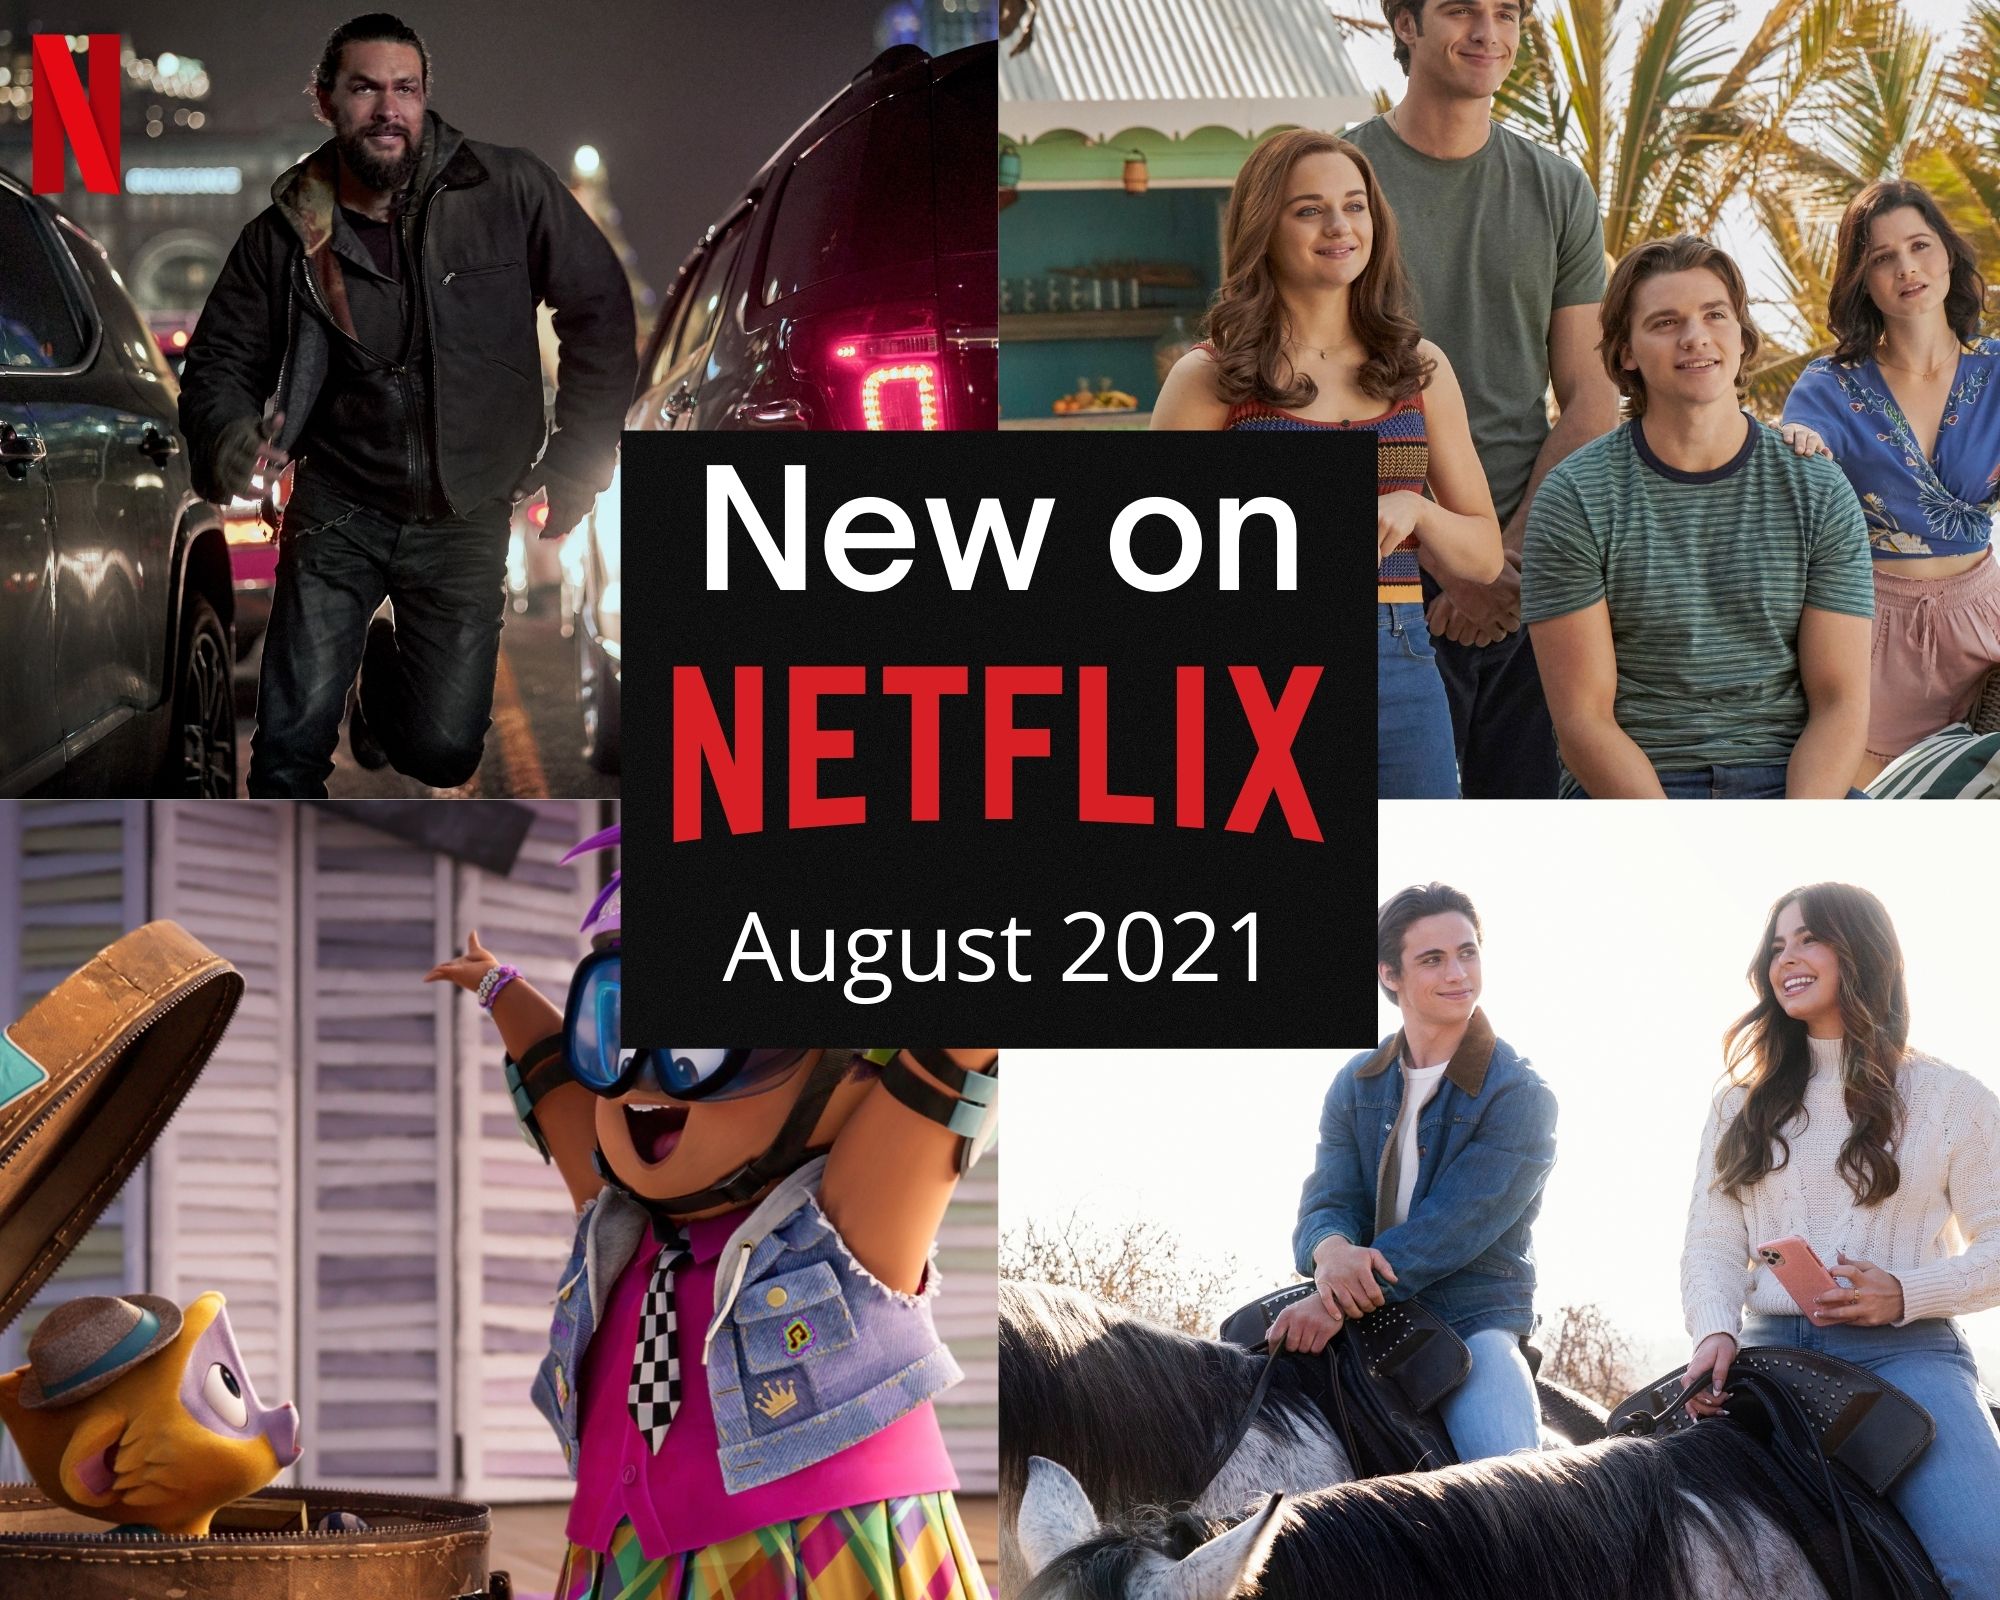 New on Netflix August 2021 collage. 